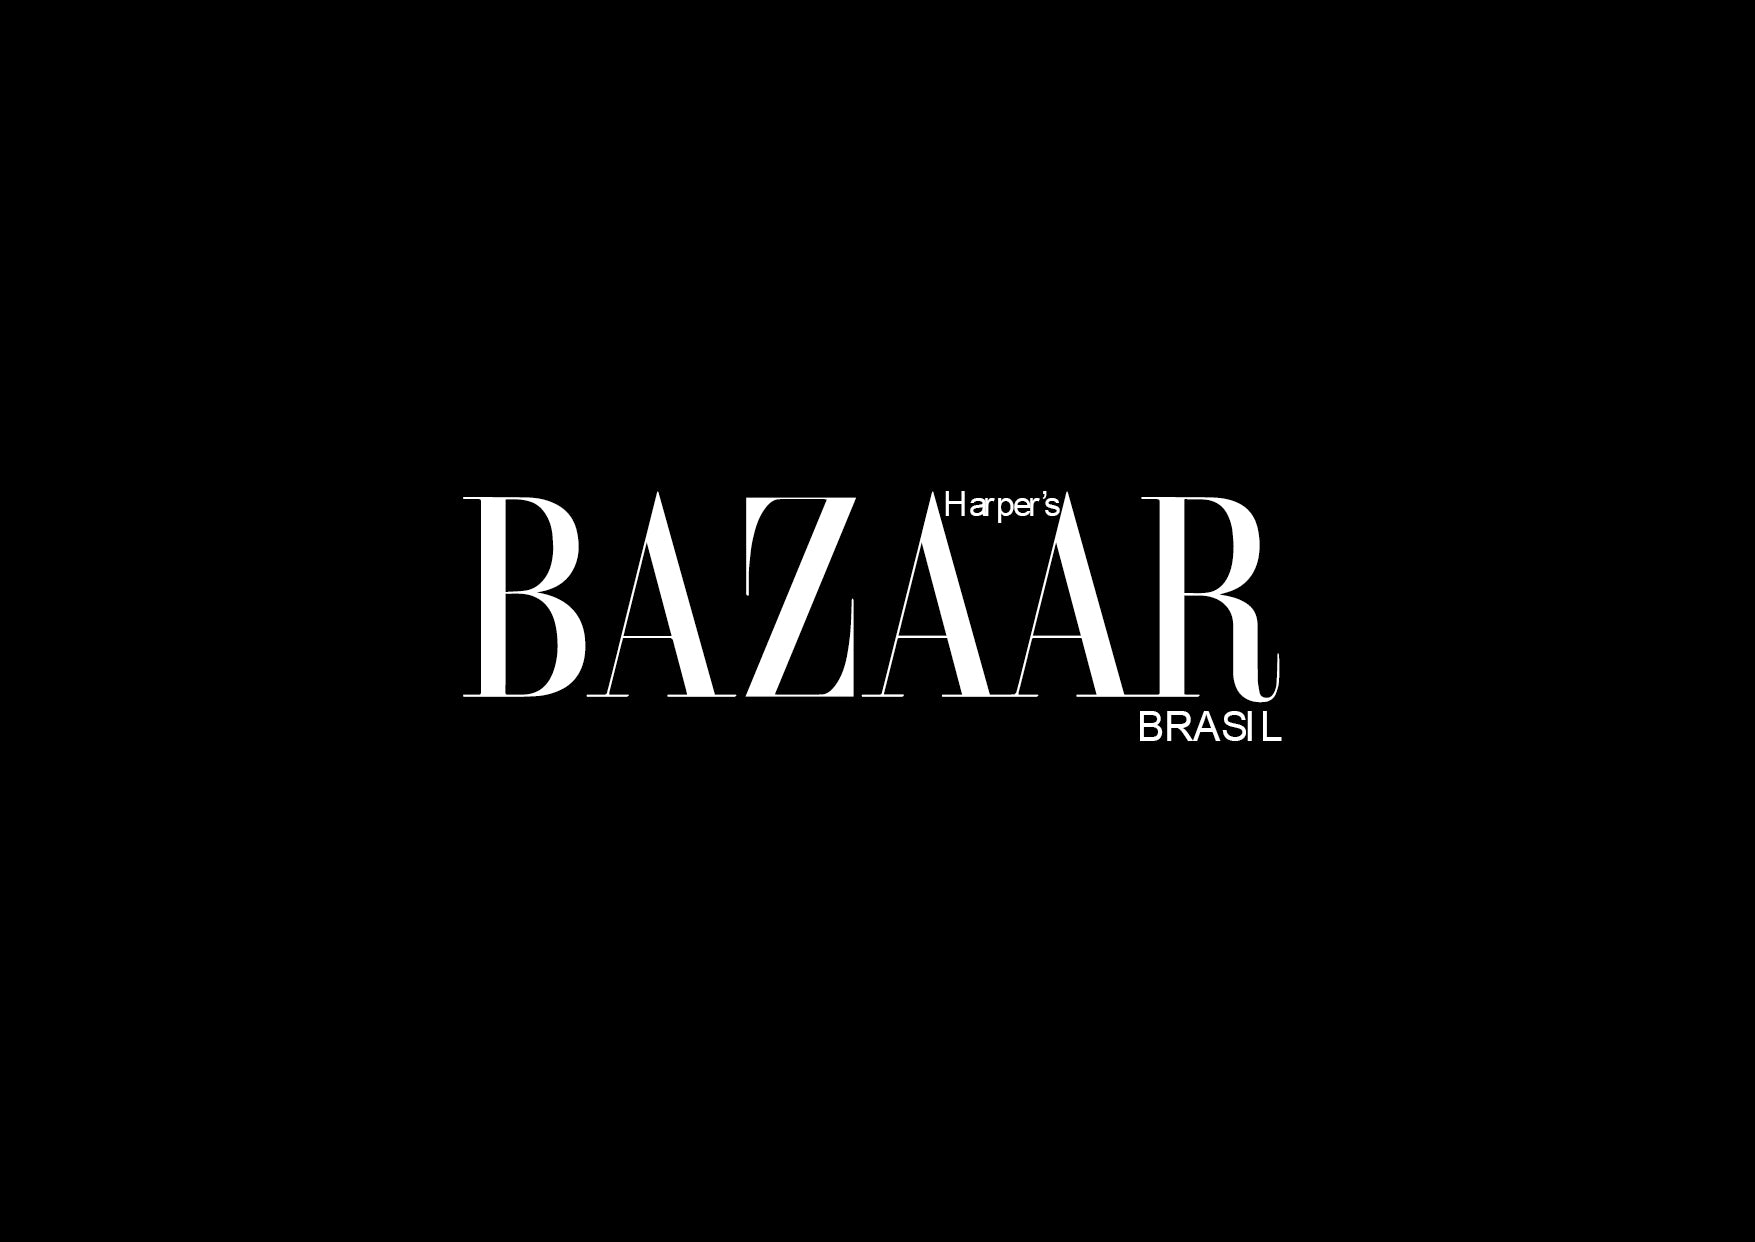 Haper's Bazar Brazil intruduces the first KARL LAGERFELD MAISON COLLECTION